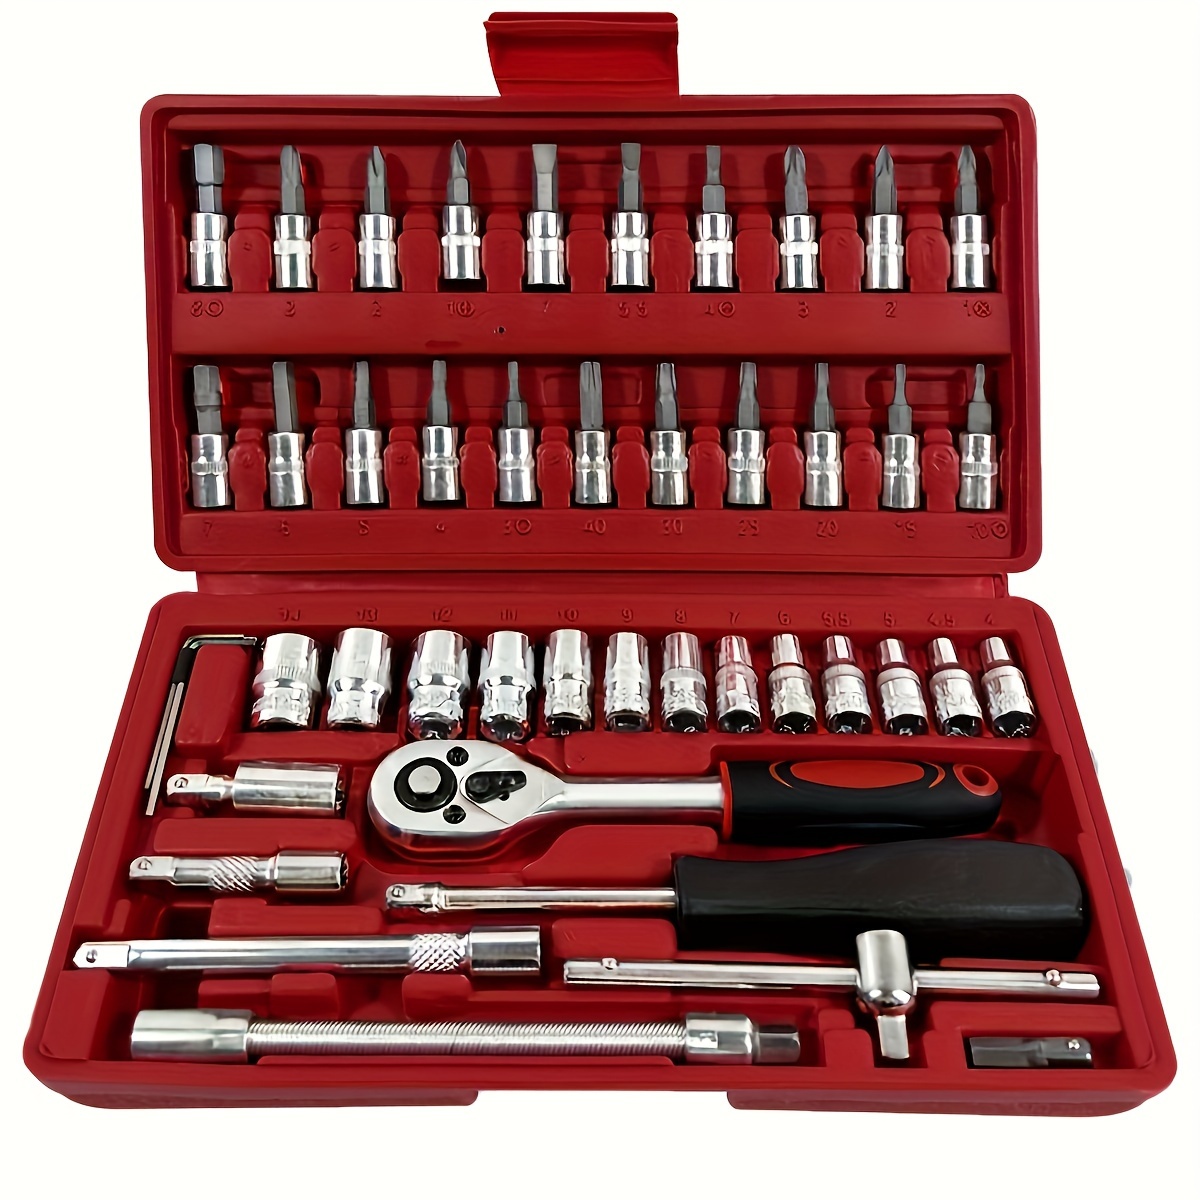 

precision" 46-piece Socket Set With 1/4" Drive - Durable Steel Ratchet Wrench Kit For Auto Repair & Home Use, Includes Metric Sockets And Storage Case